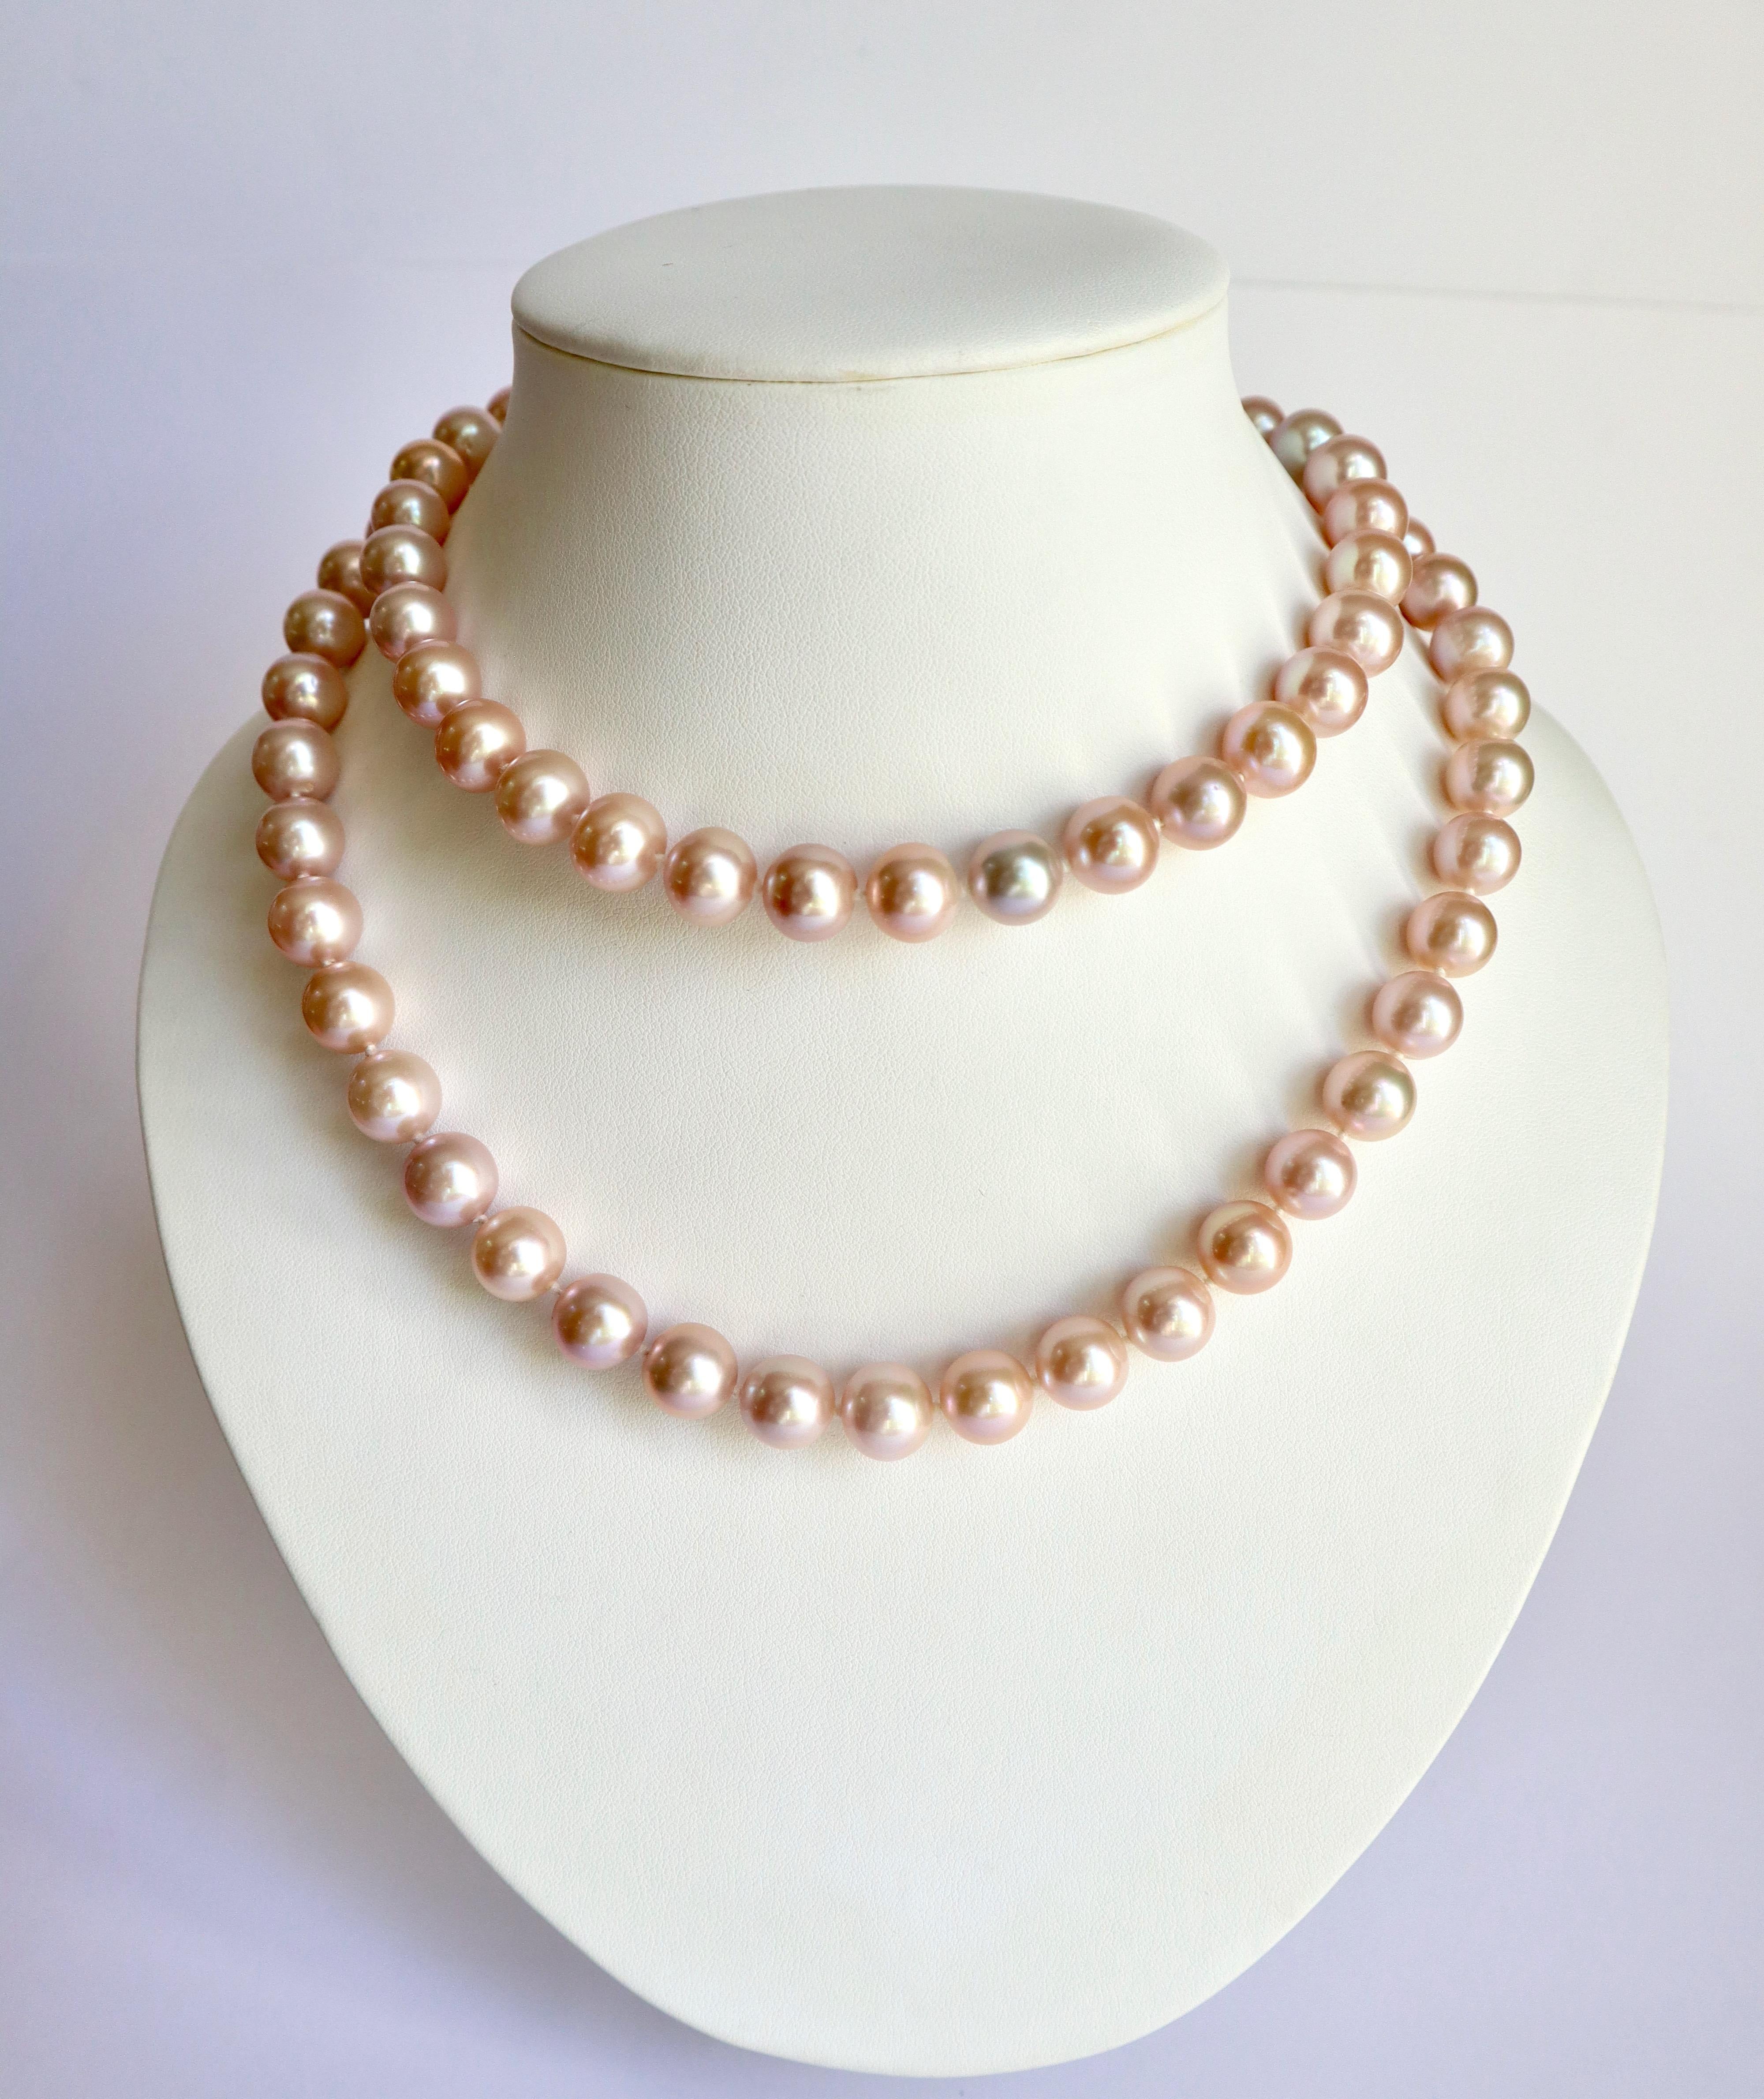 Long necklace of beautiful pink pearls composed of 76 probably treated large pink cultured pearls with a diameter of 10.5 to 11 mm.
Length: 84 cm
Gross weight: 131.9 g